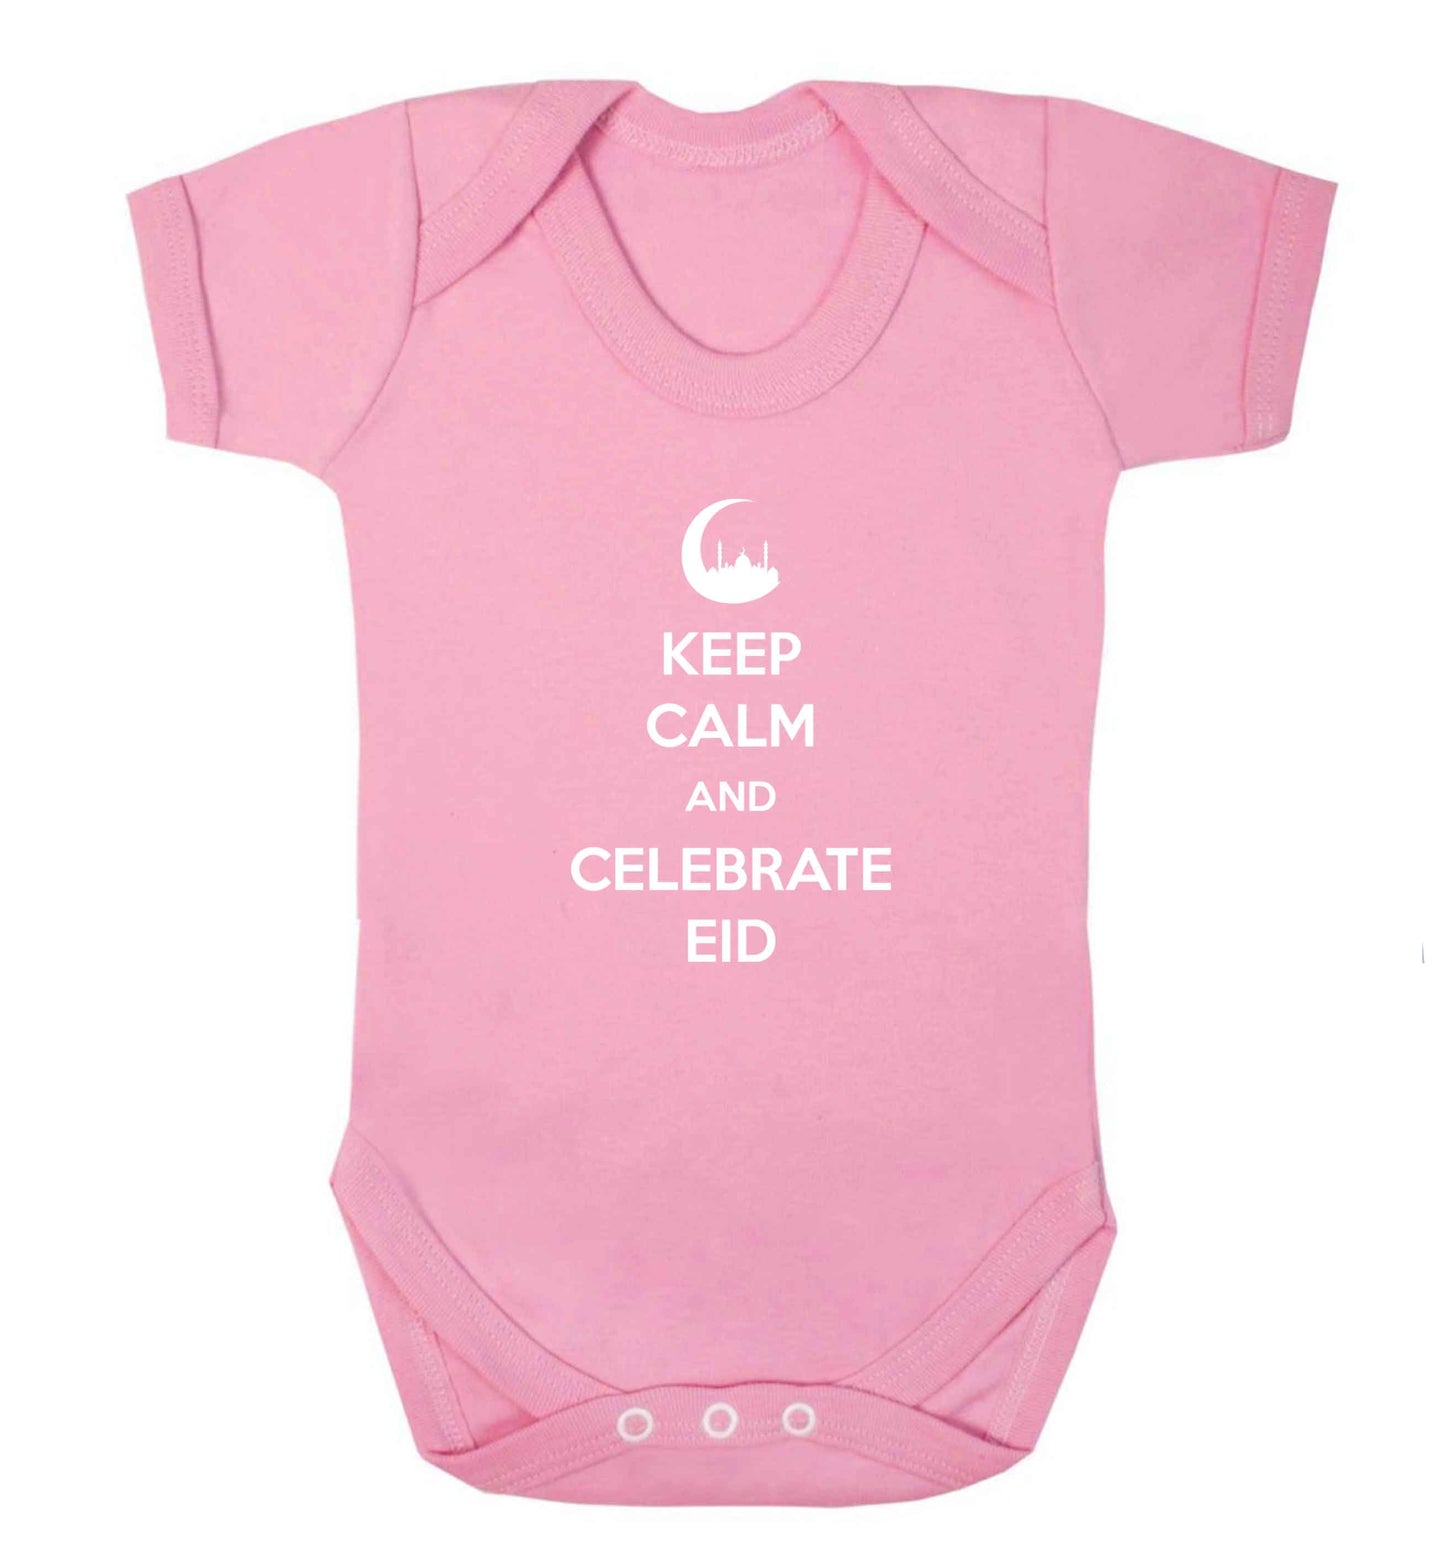 Keep calm and celebrate Eid baby vest pale pink 18-24 months